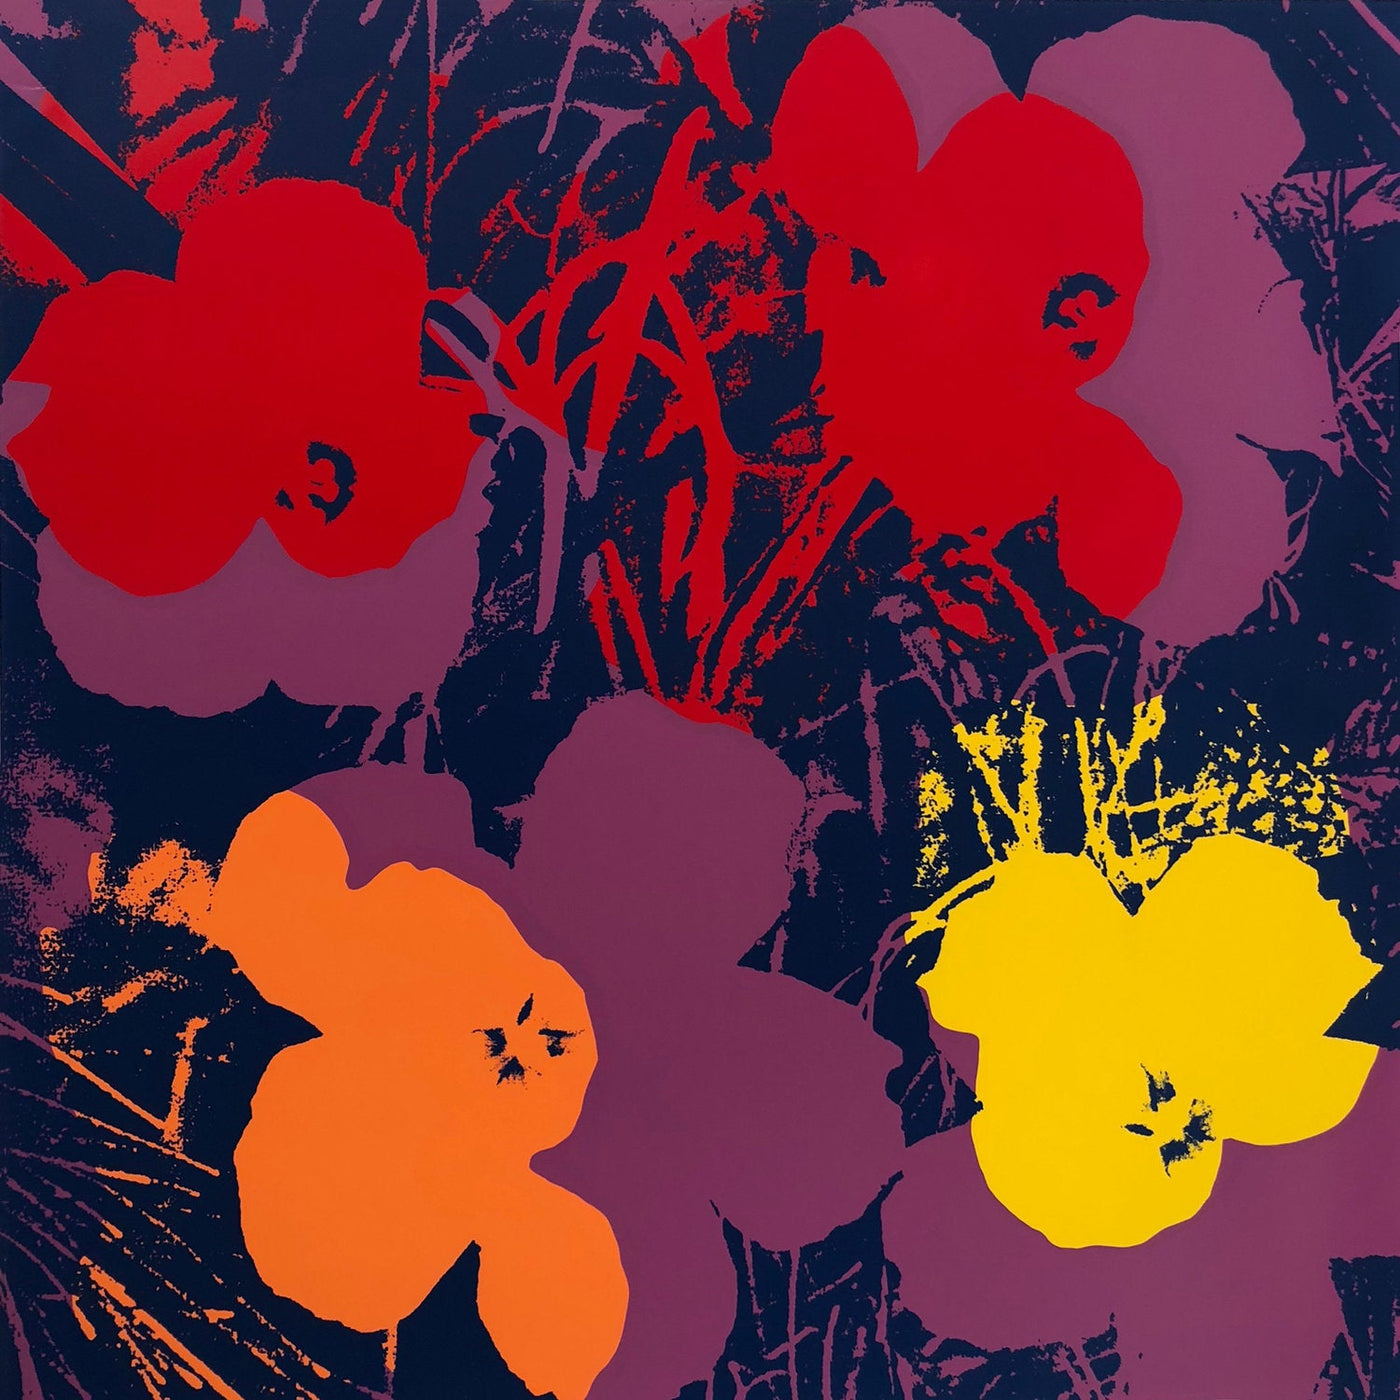 Sunday B. Morning (after Andy Warhol) Flowers II.66